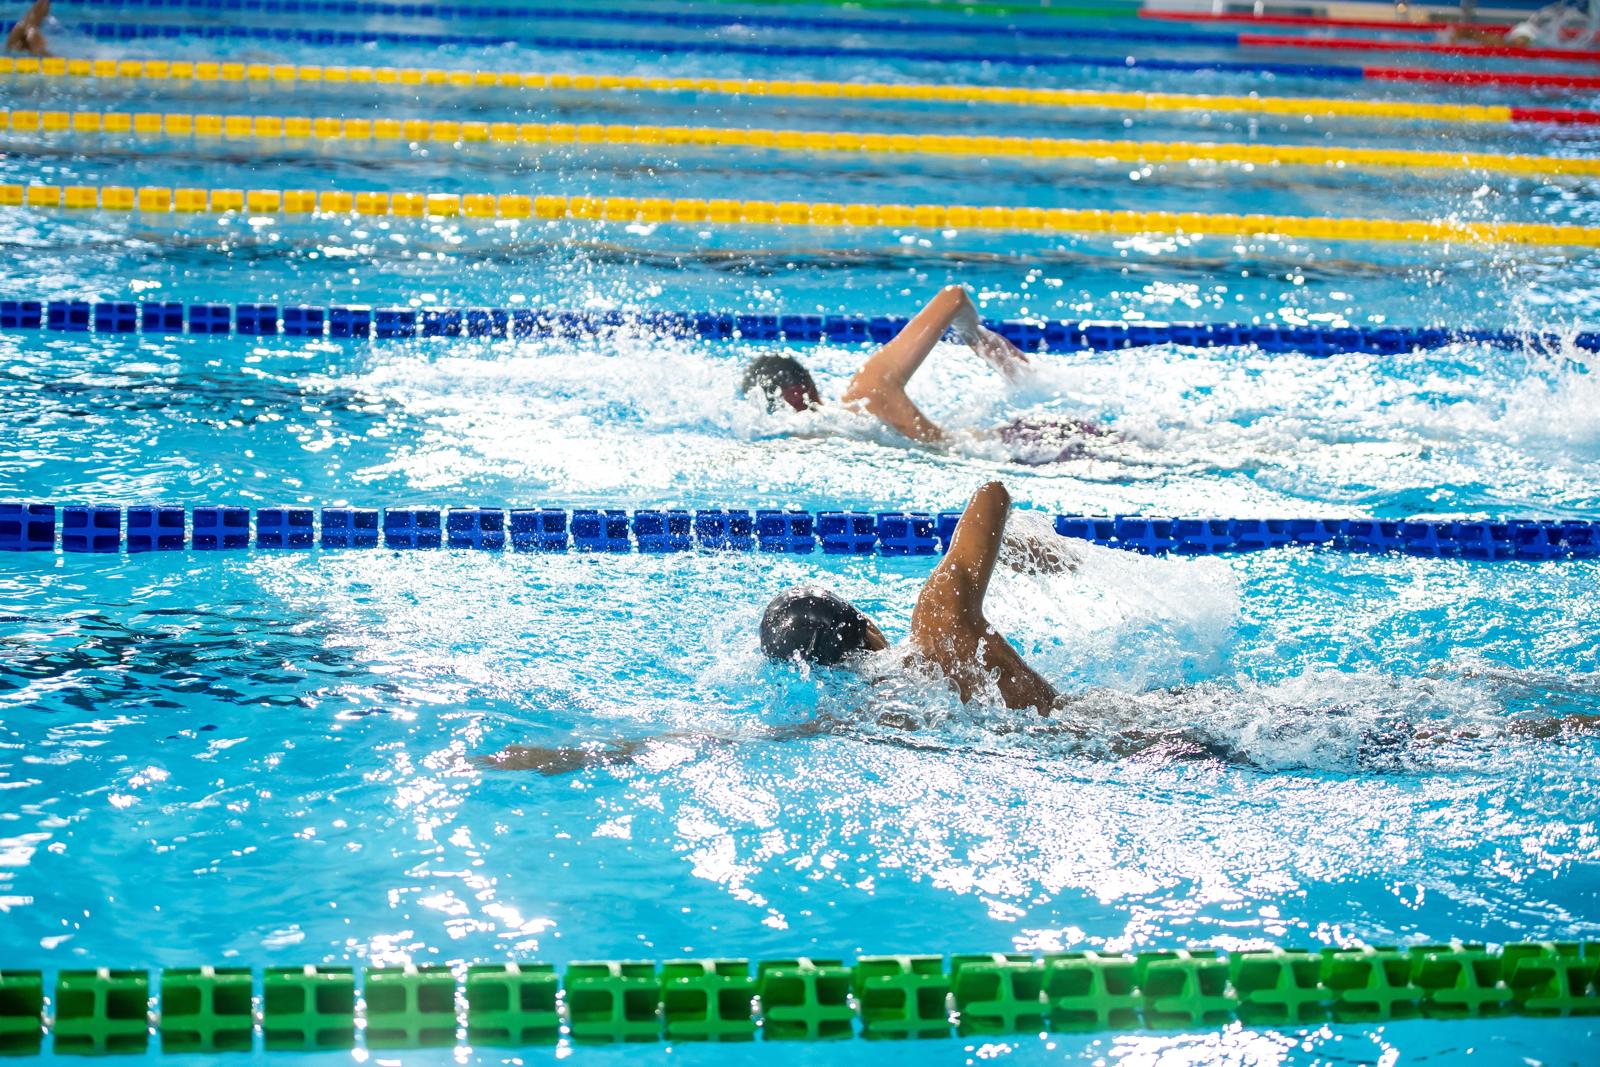 Swimmers competing in Gulf Youth Games in UAE